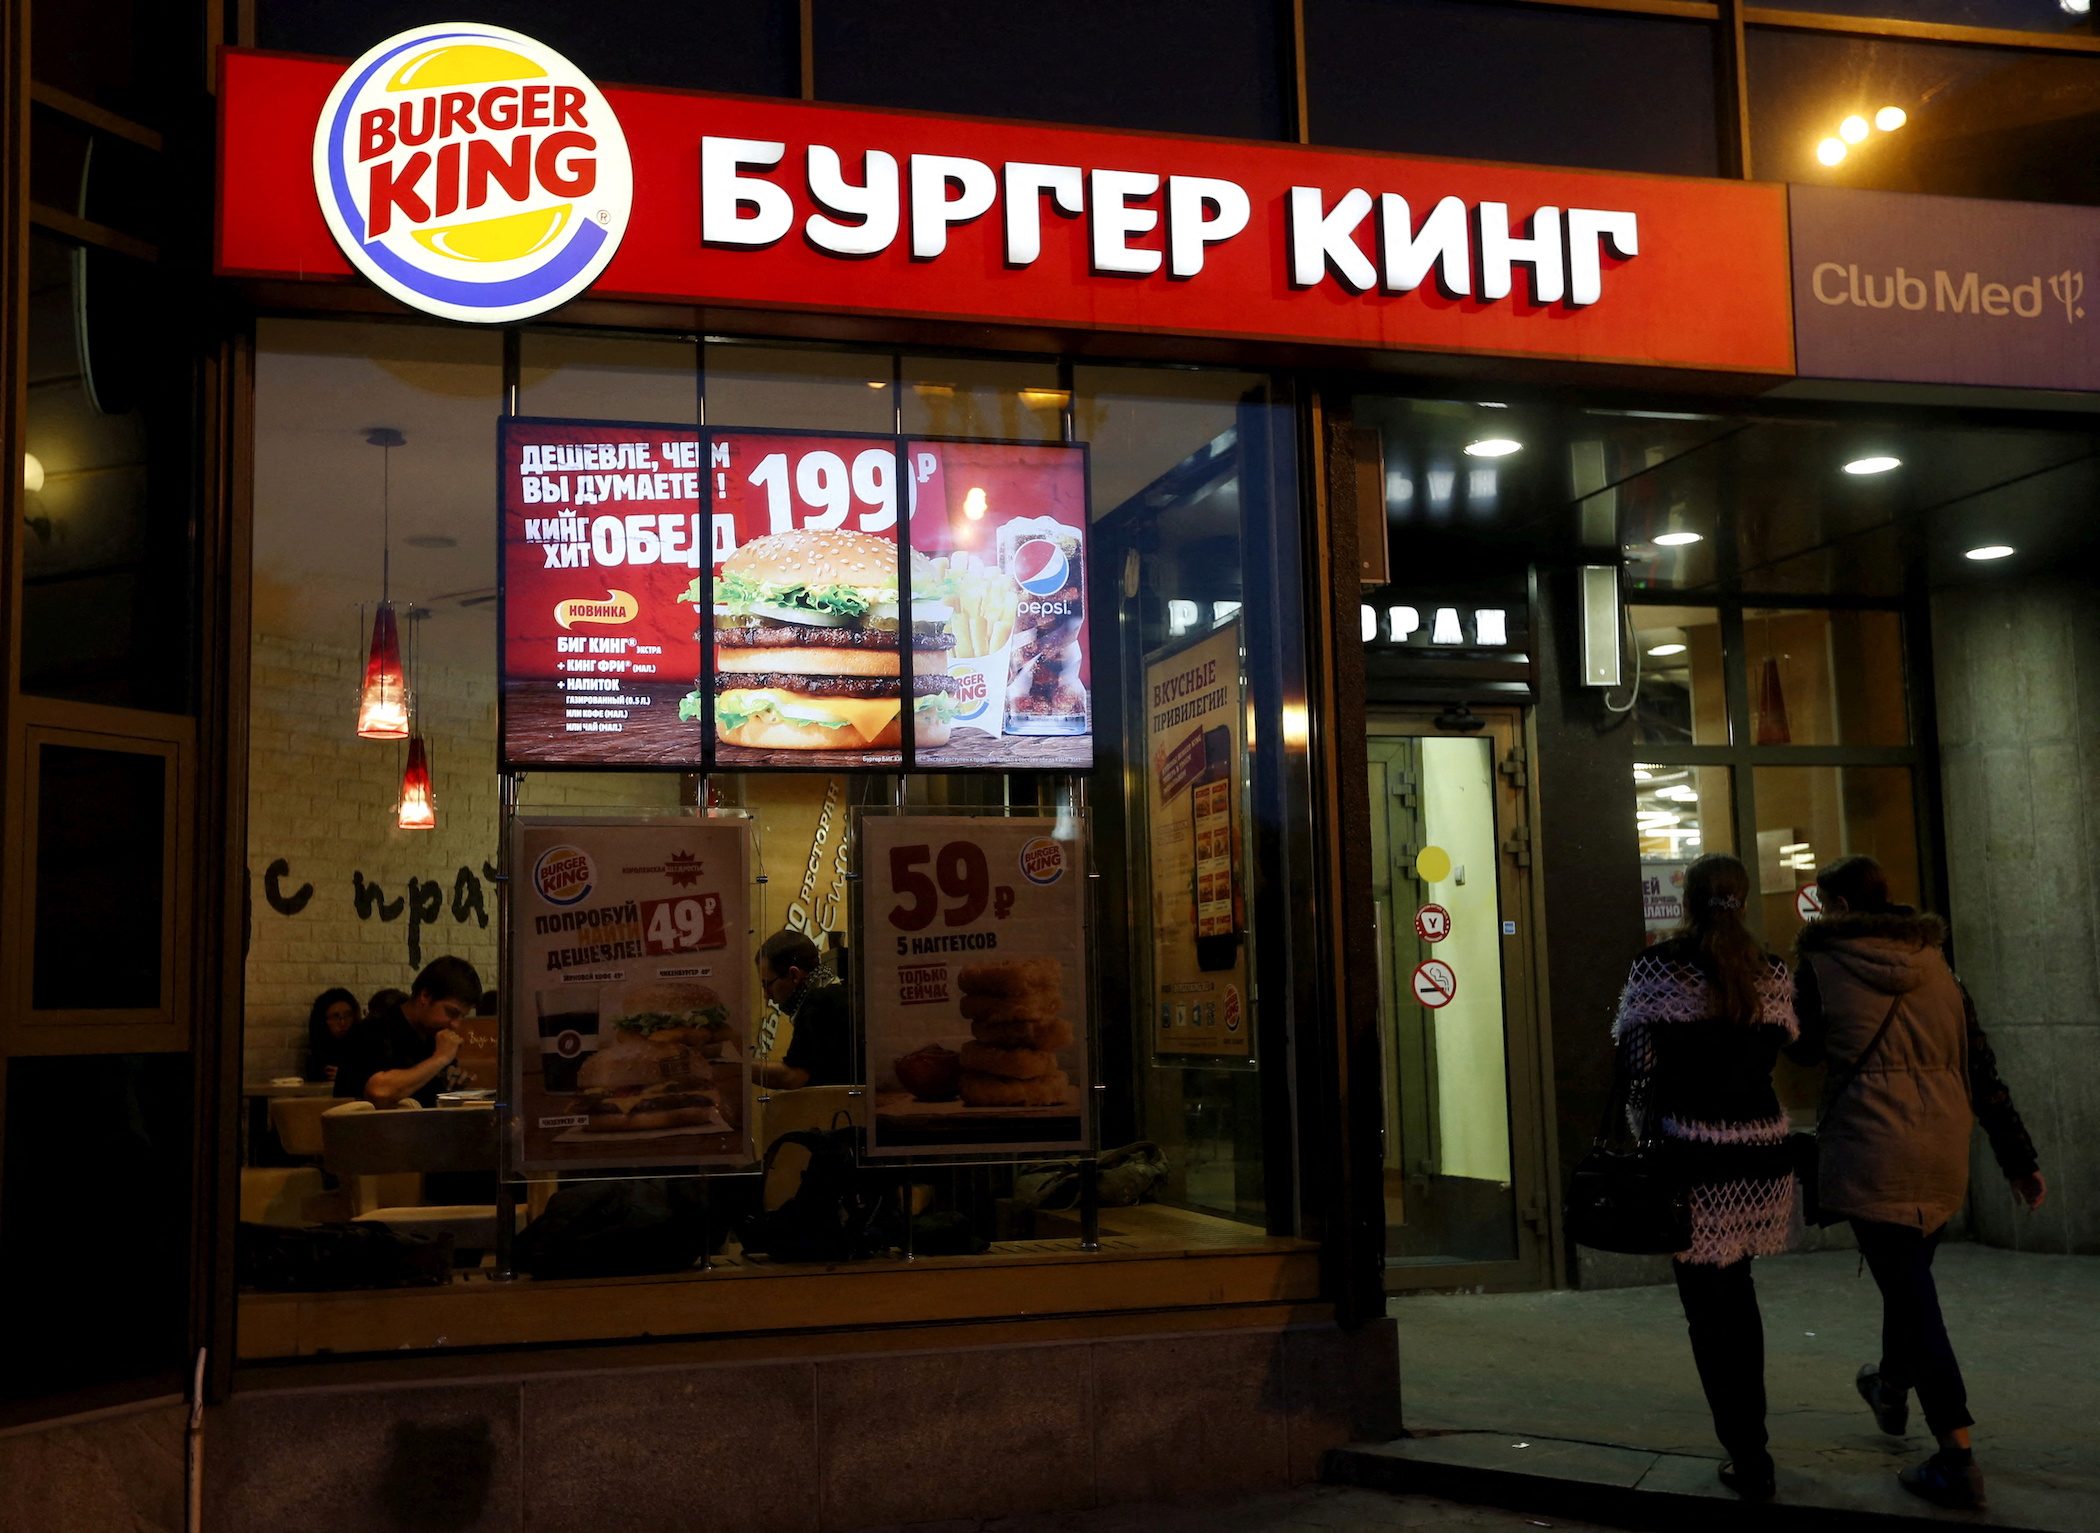 Burger King says Russia franchisee ‘refused’ to shutter restaurants